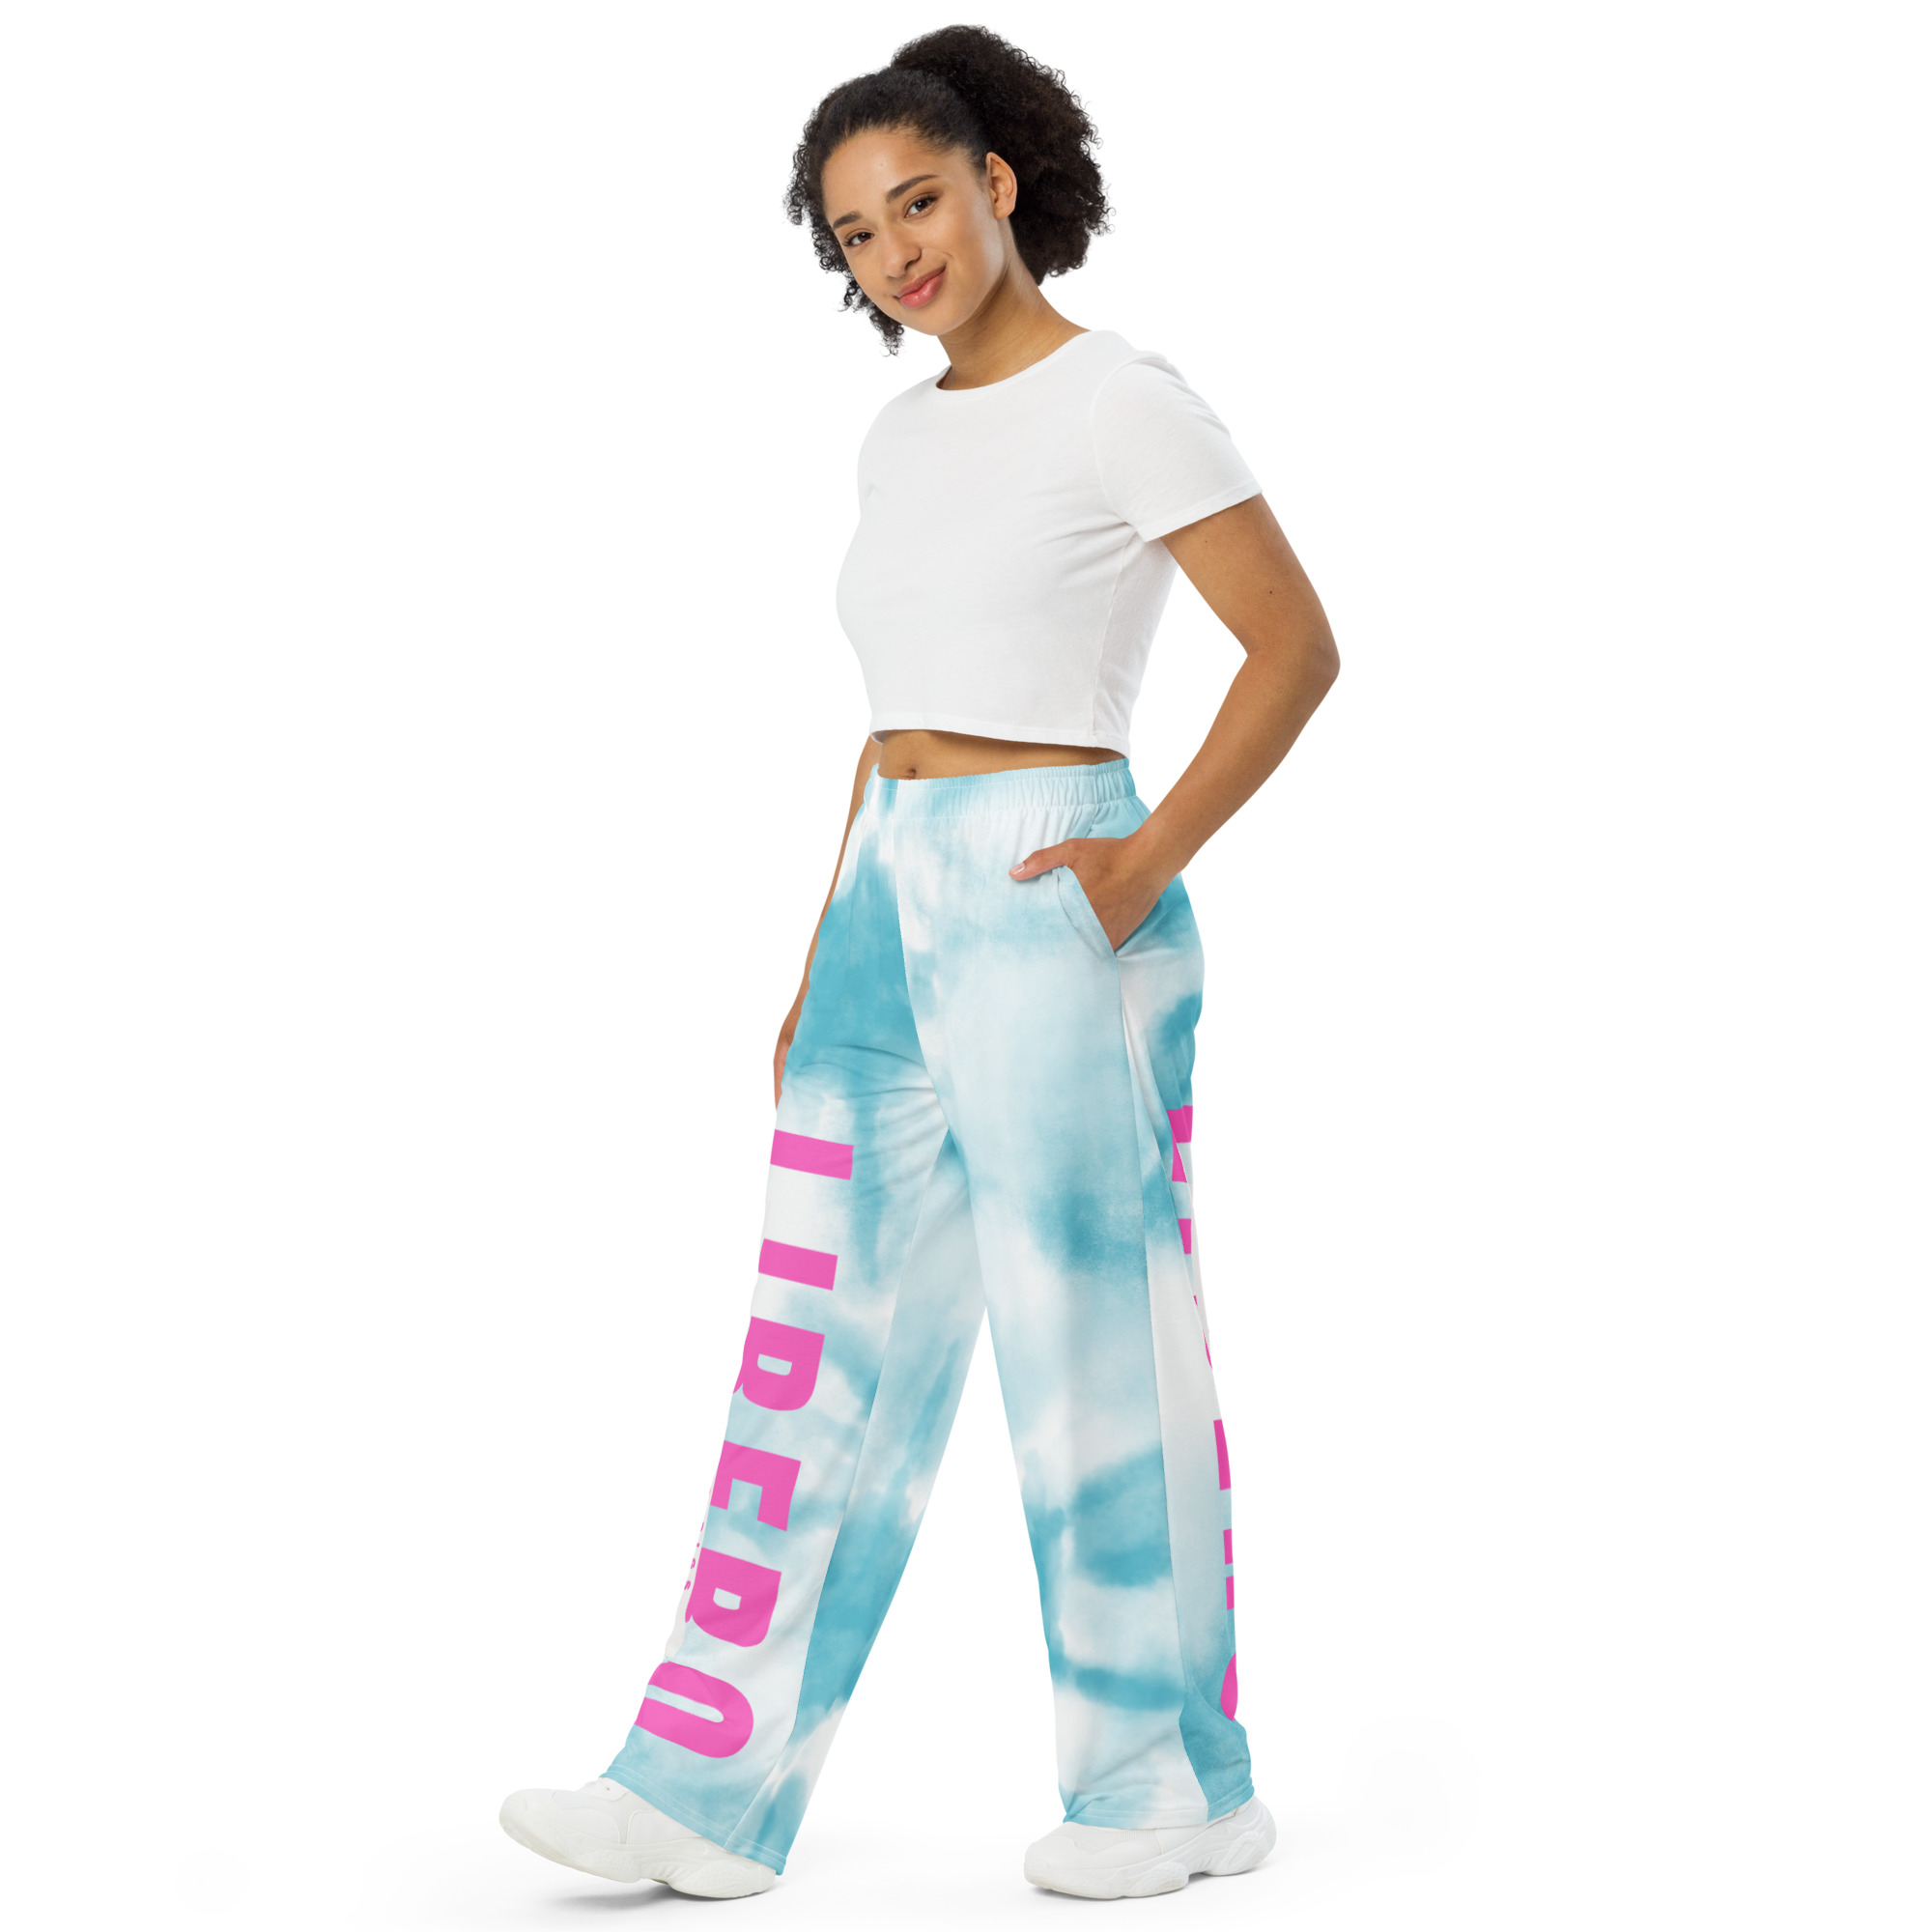 My cute and colorful volleyball pj pants, inspired by the 2020 Tokyo Olympic games, give you the perfect opportunity to show support for your favorite international volleyball teams during the event.